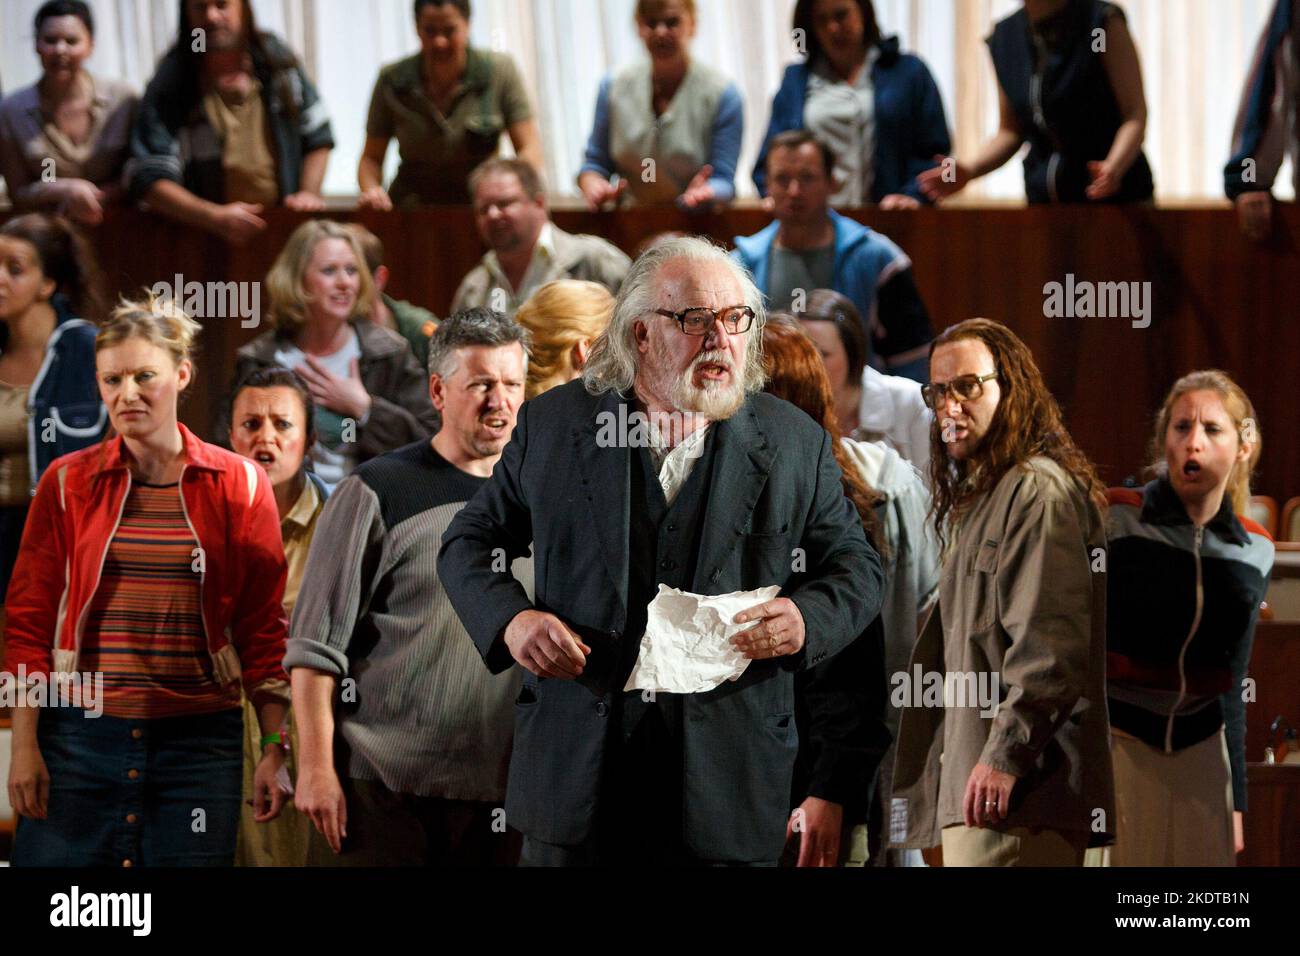 addressing the people: John Tomlinson (Moses) with (front left) Elizabeth Atherton (A Young Maiden) in MOSES UND ARON by Schoenberg at Welsh National Opera (WNO), Wales Millennium Centre, Cardiff, Wales  24/05/2014  conductor: Lother Koenigs  design: Anna Viebrock  lighting: Tim Mitchell  directors: Jossi Wieler & Sergio Morabito Stock Photo